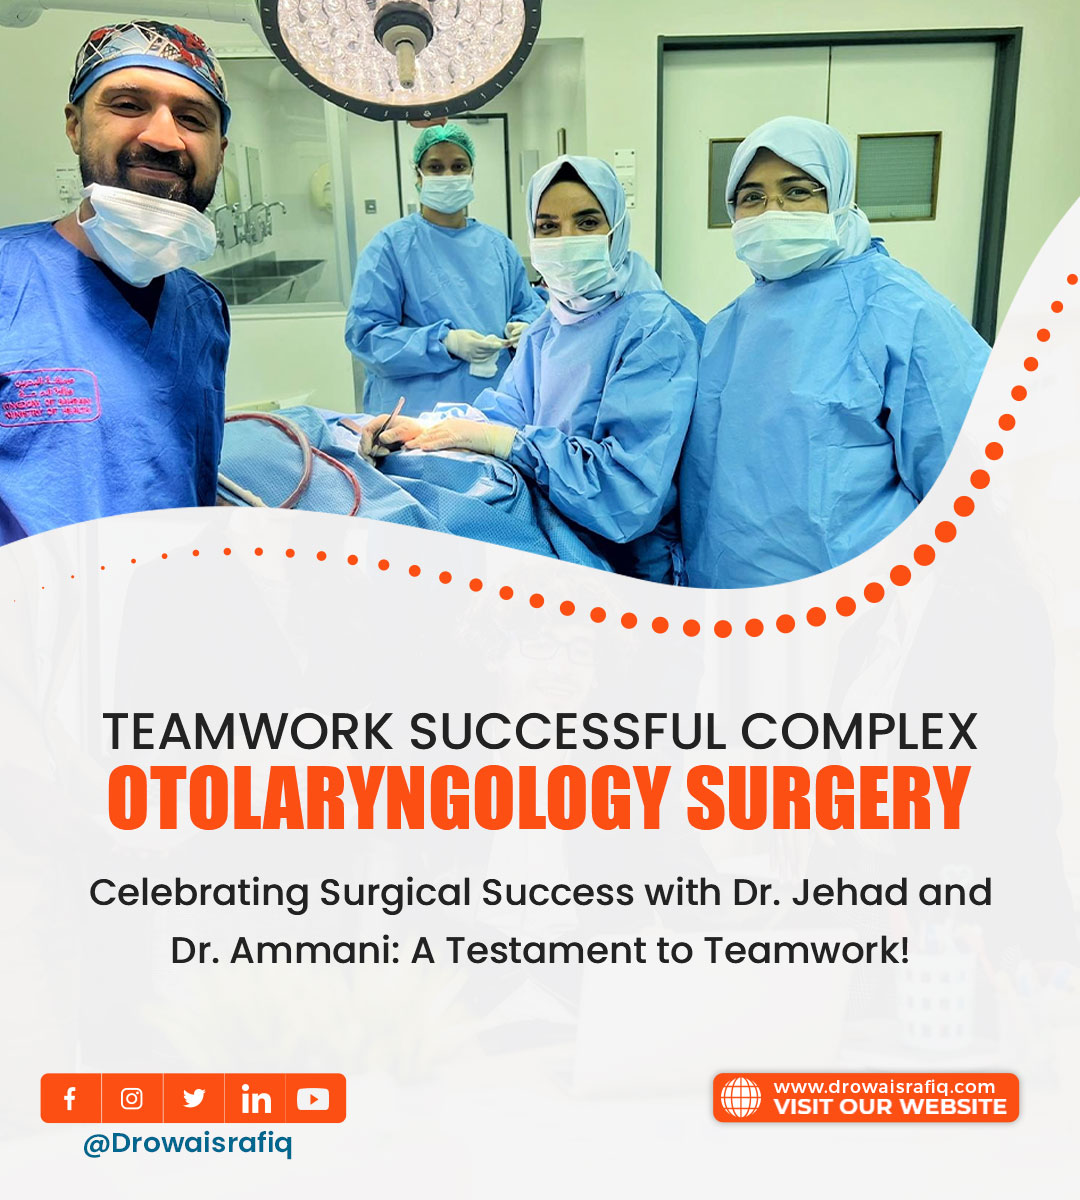 Thrilled to be part of a successful teamwork in a complex ENT surgery! Together with ENT Surgeon Dr. Jehad and Dr. Ammani, we achieved outstanding results for our patients.👏 

#DROWAIS #childcare #entsurgery #anaesthesia #ENTsurgery #Teamwork #Collaboration #Healthcare